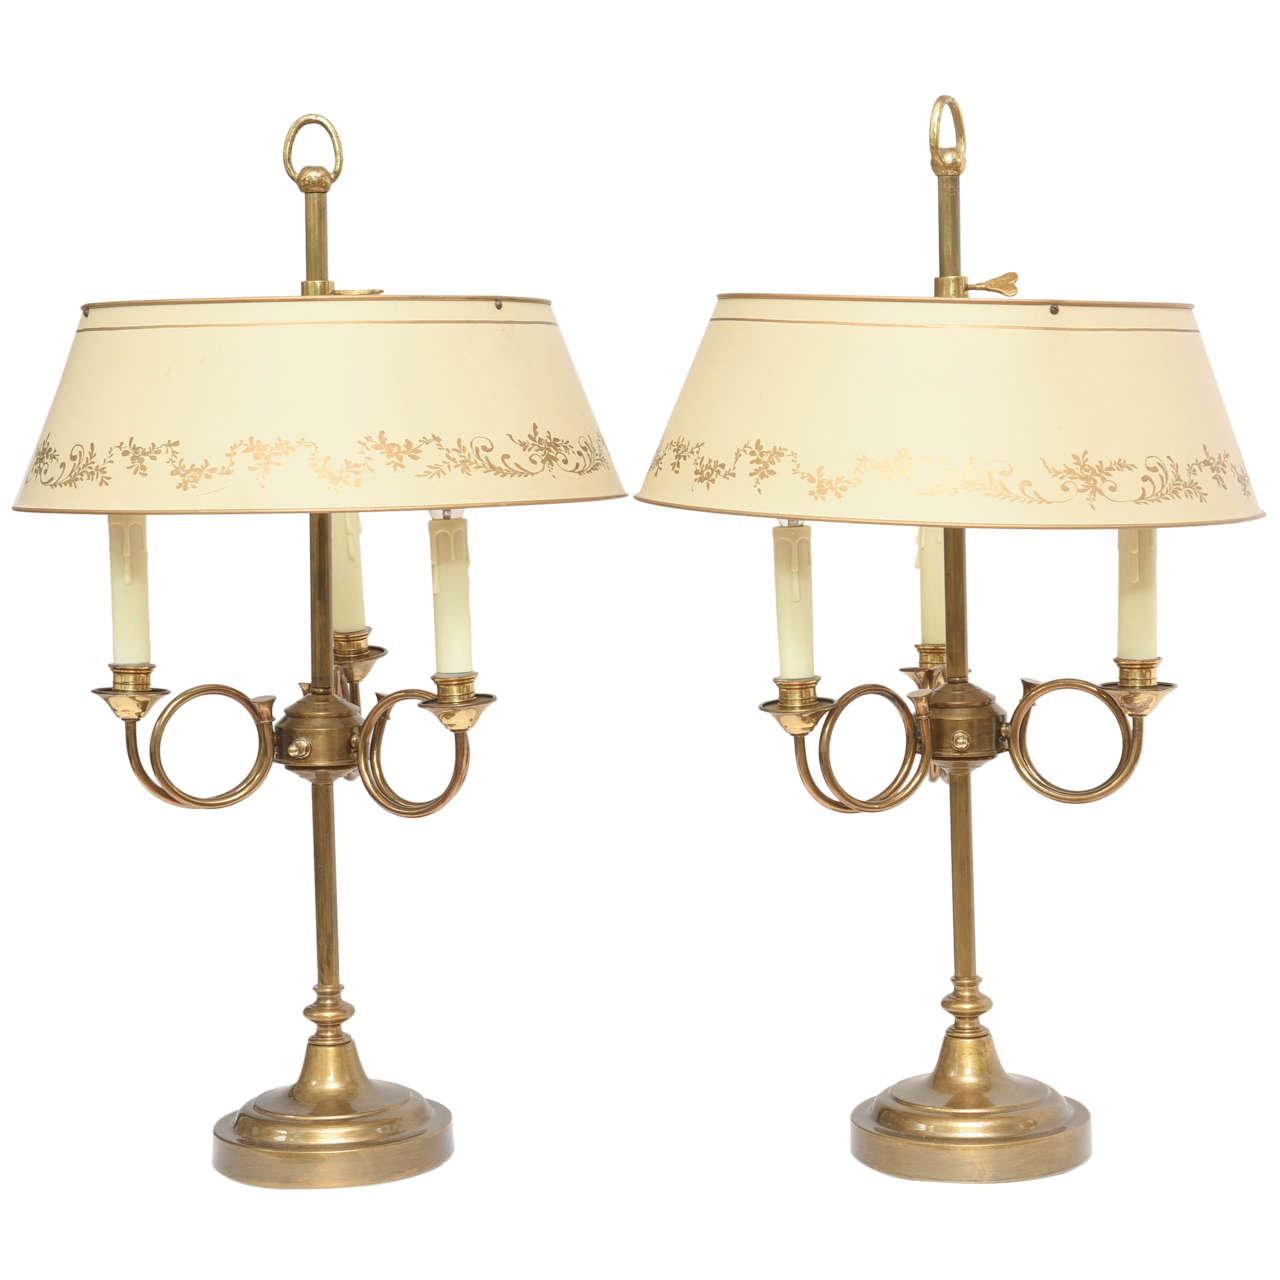 Pair of French Bouillotte Table Lamps with Tole Shades